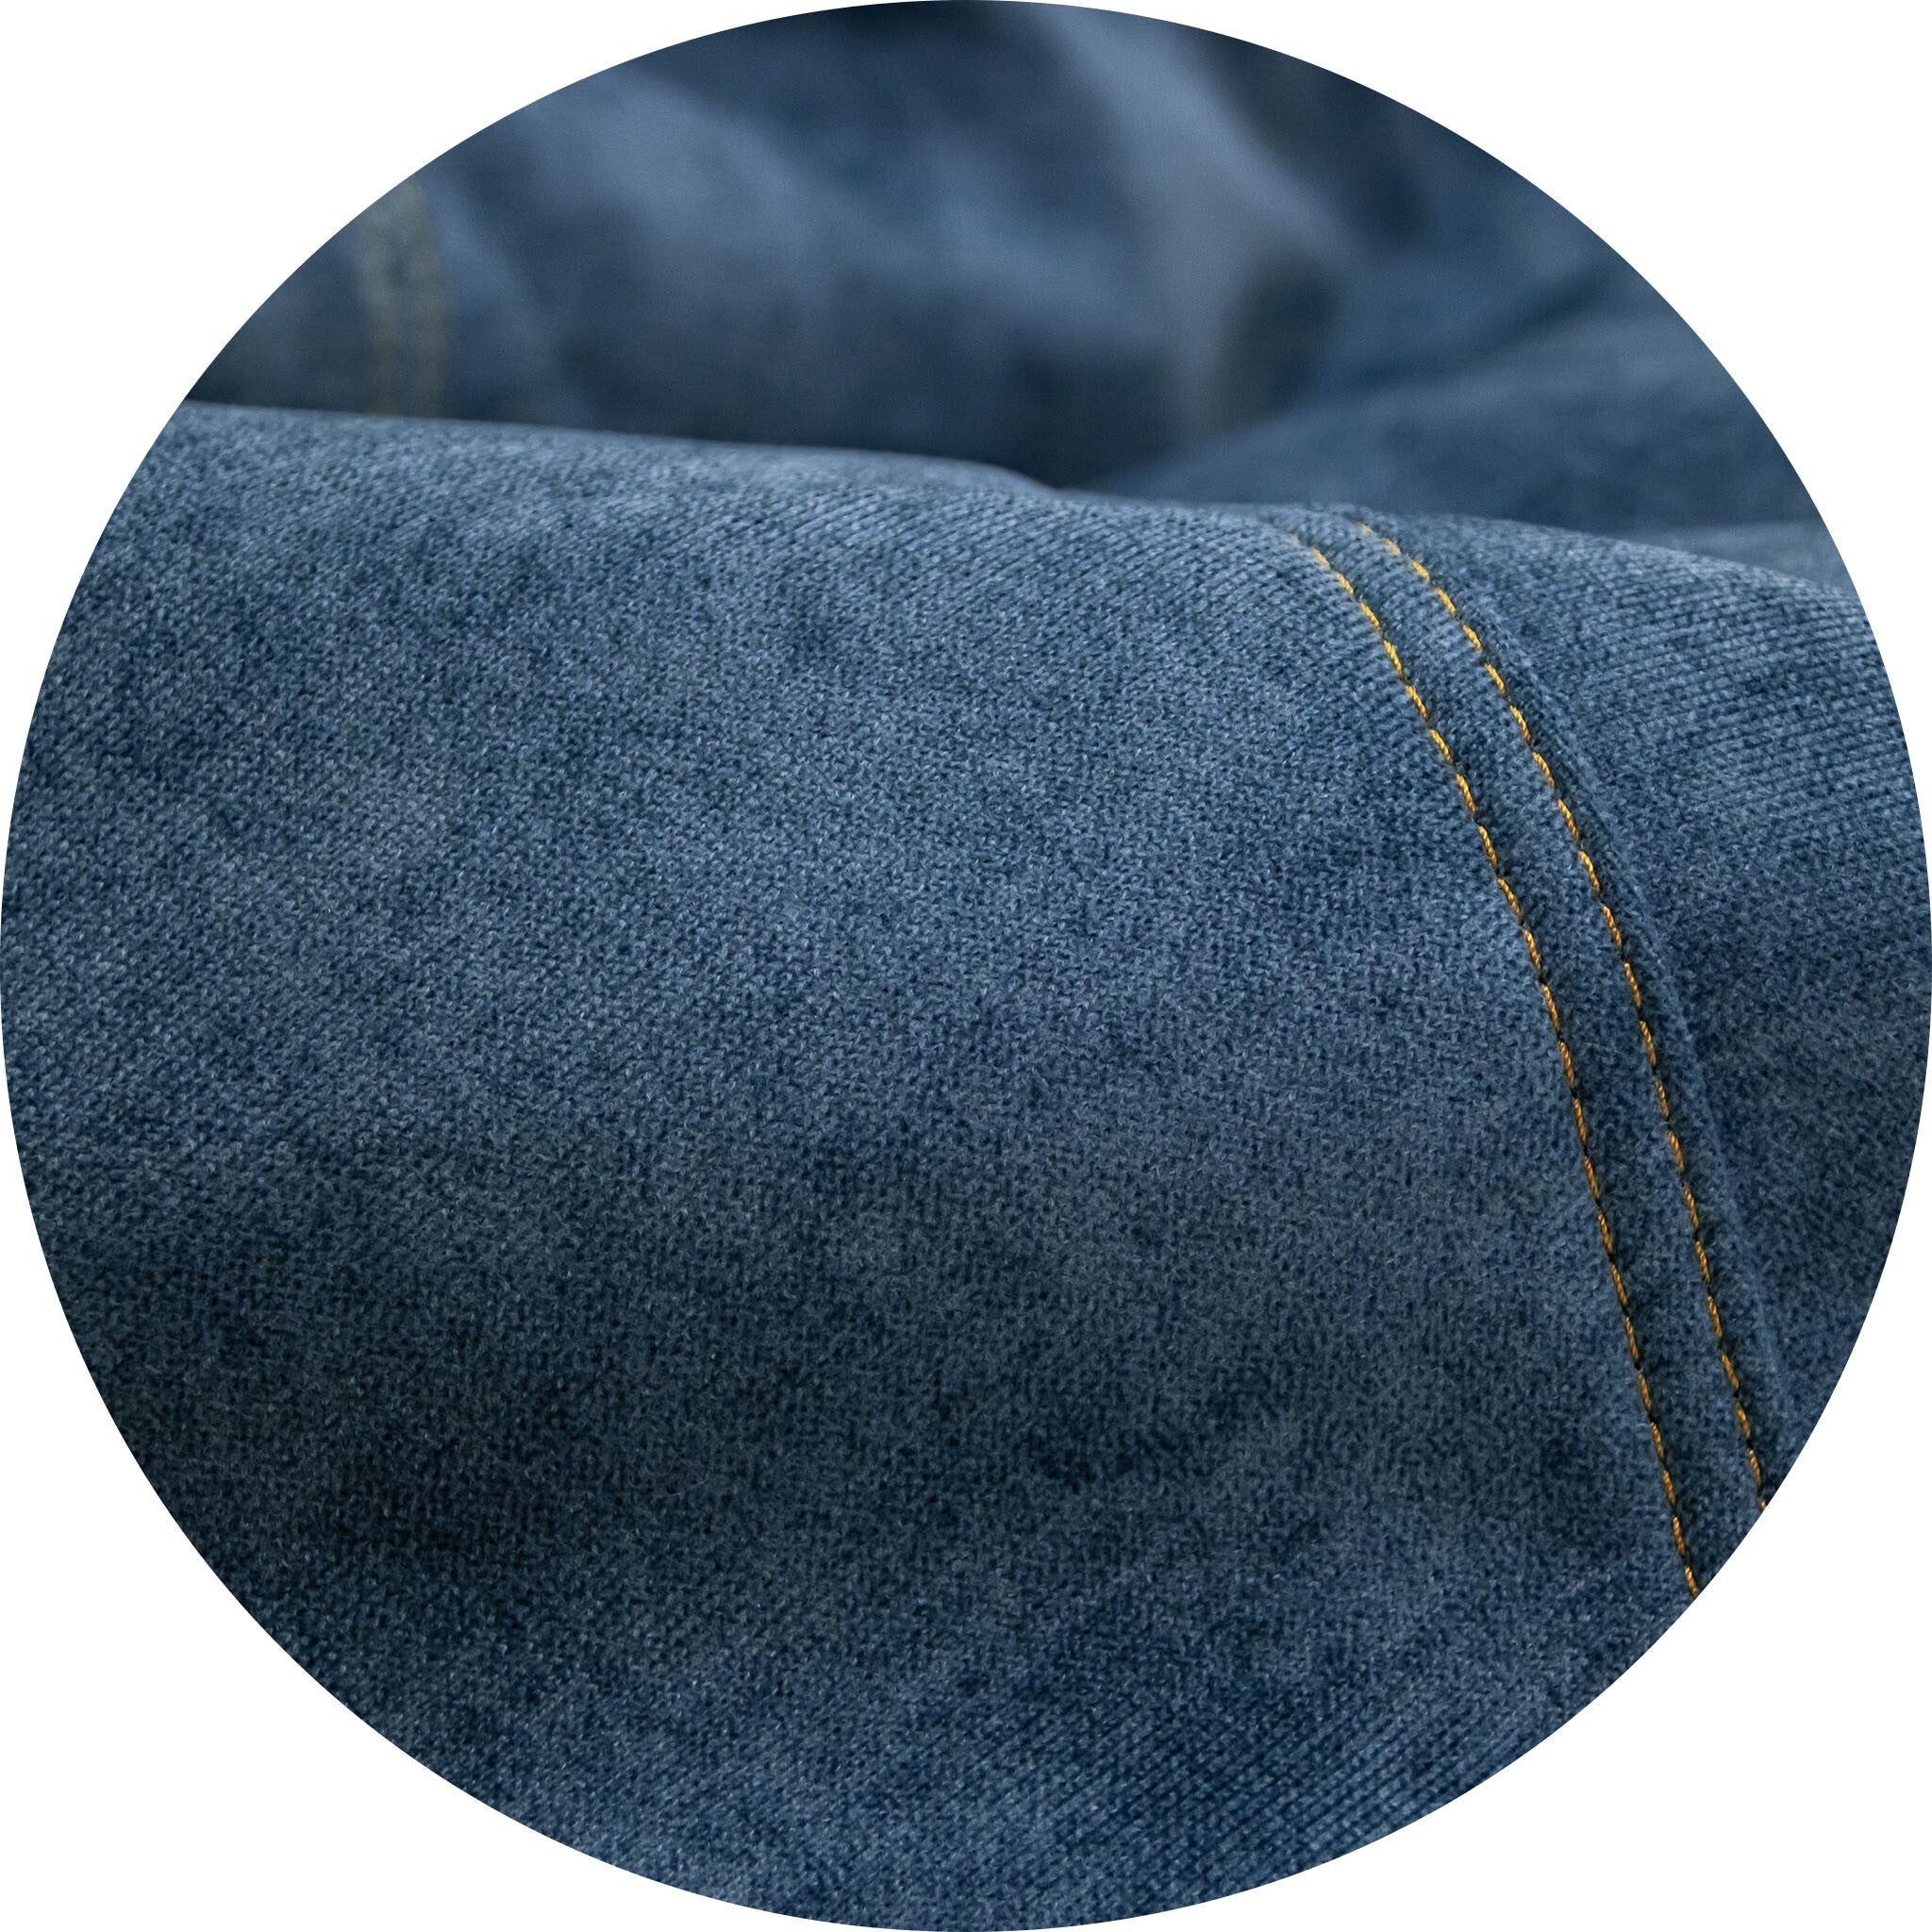 Pouf Cover - Sueded Denim